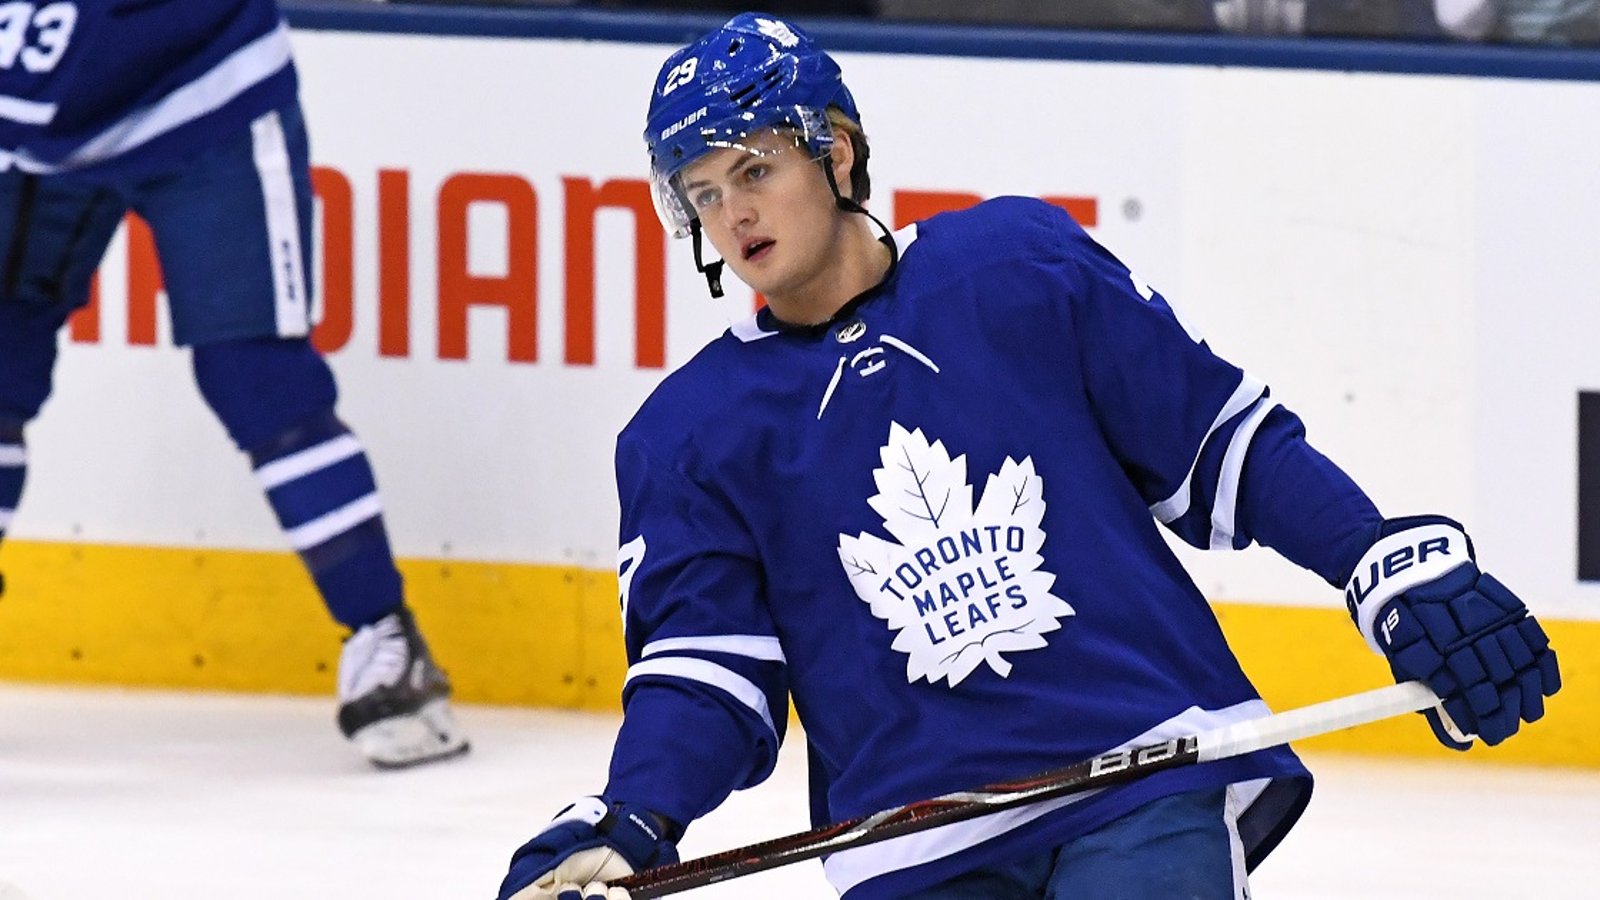 Update from Dreger following reports of a serious KHL offer for Willaim Nylander.